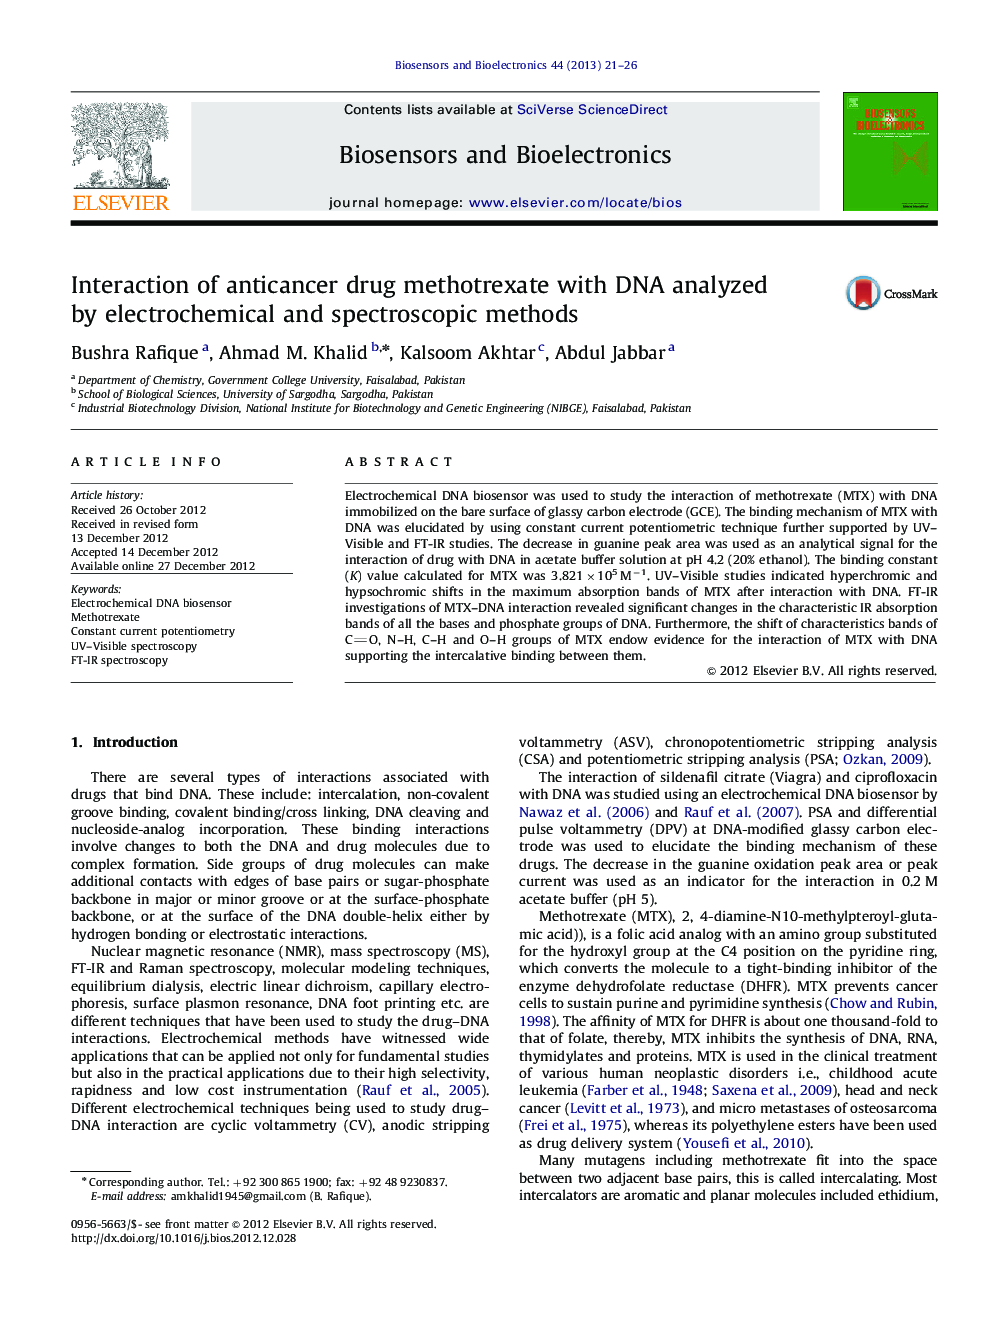 Interaction of anticancer drug methotrexate with DNA analyzed by electrochemical and spectroscopic methods